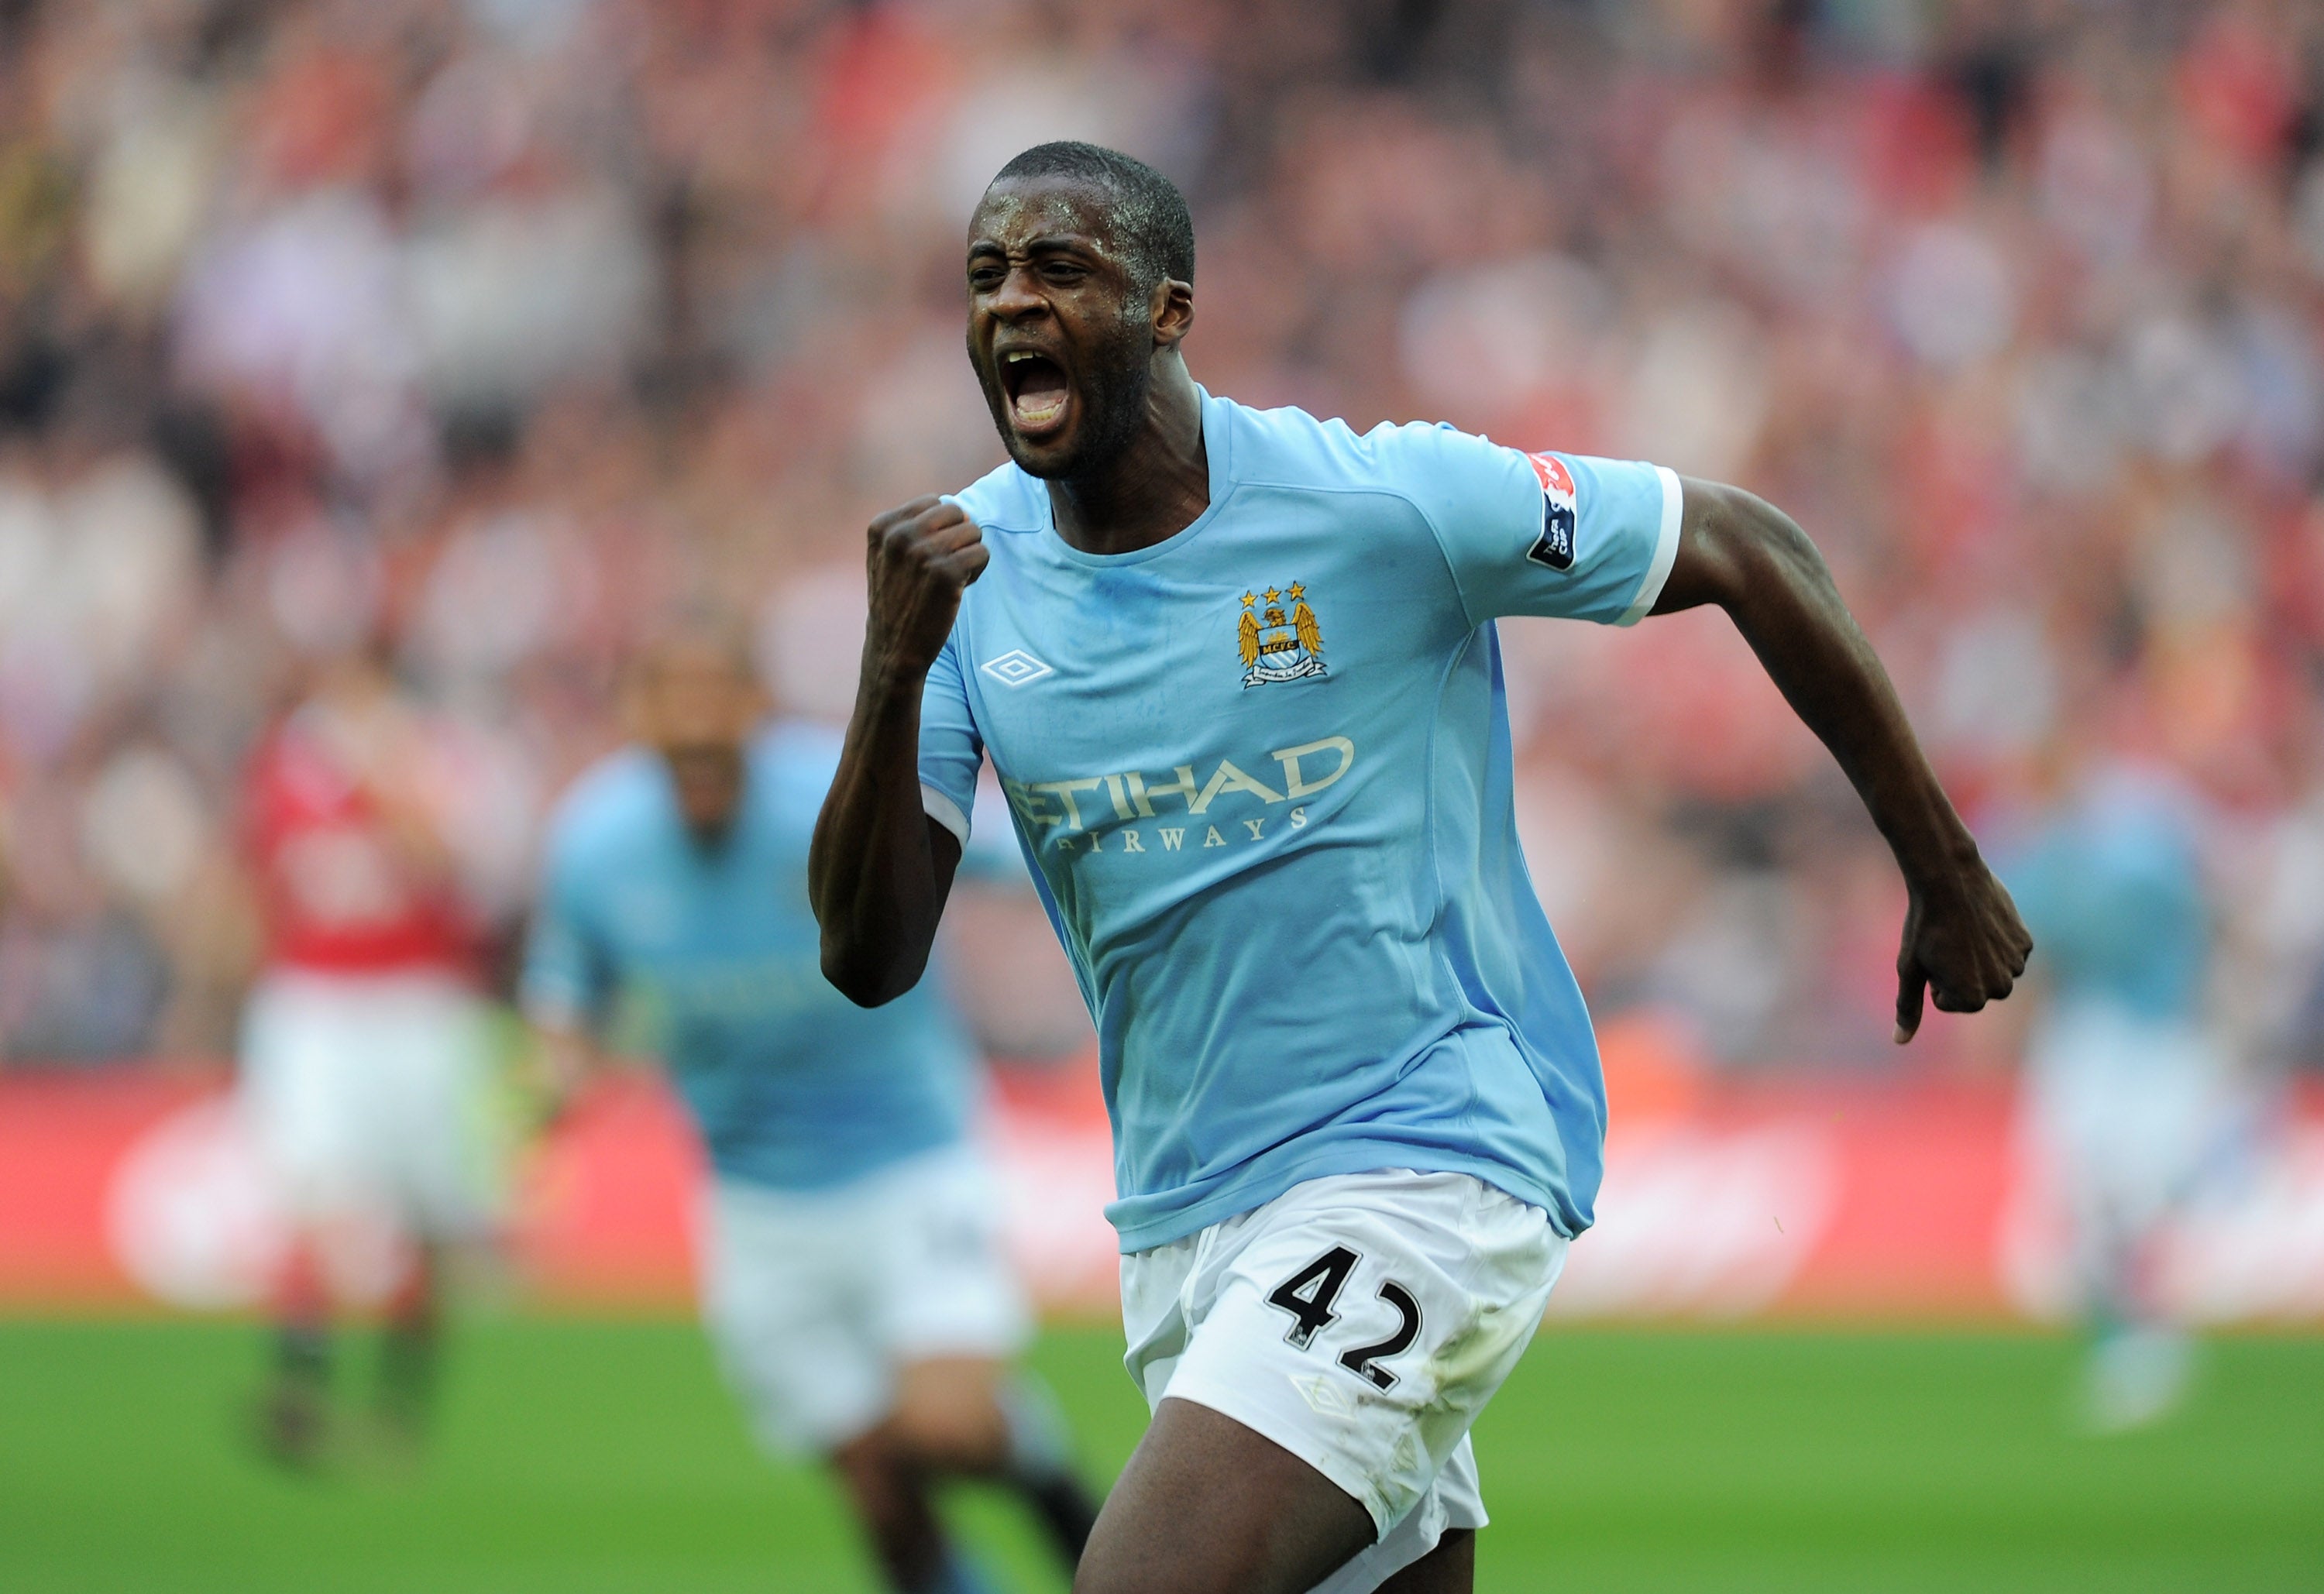 Yaya Toure: Former Manchester City and Barcelona star wants more